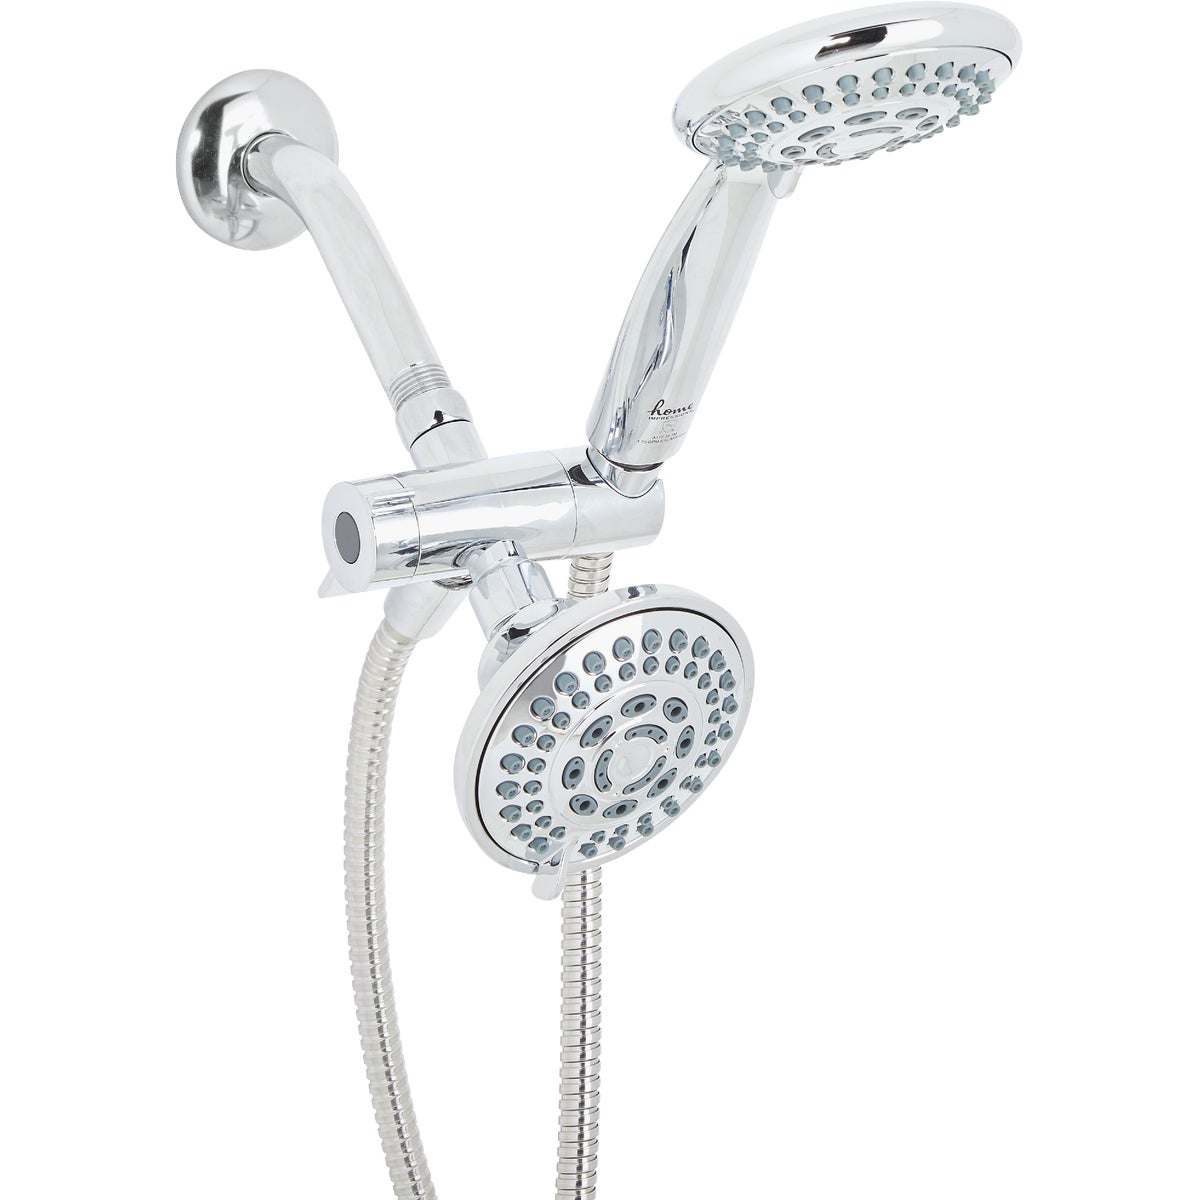 Home Impressions 5-Spray 1.75 GPM Combo Hand-Held Shower and Showerhead, Chrome